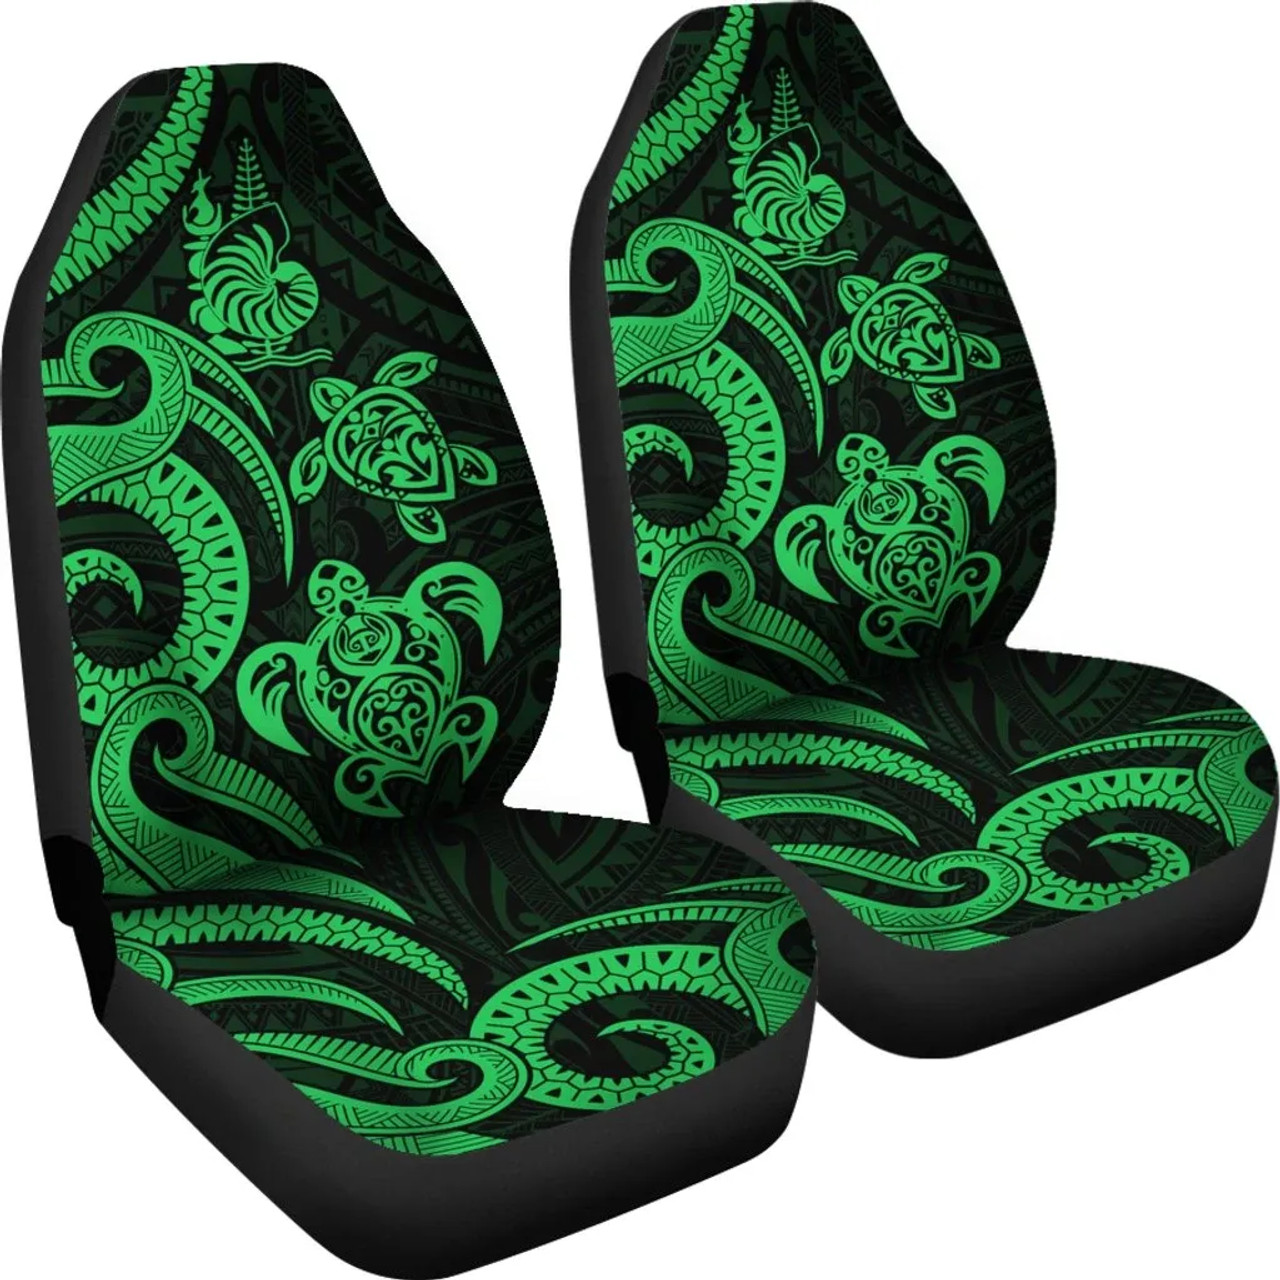 New Caledonia Car Seat Covers - Green Tentacle Turtle